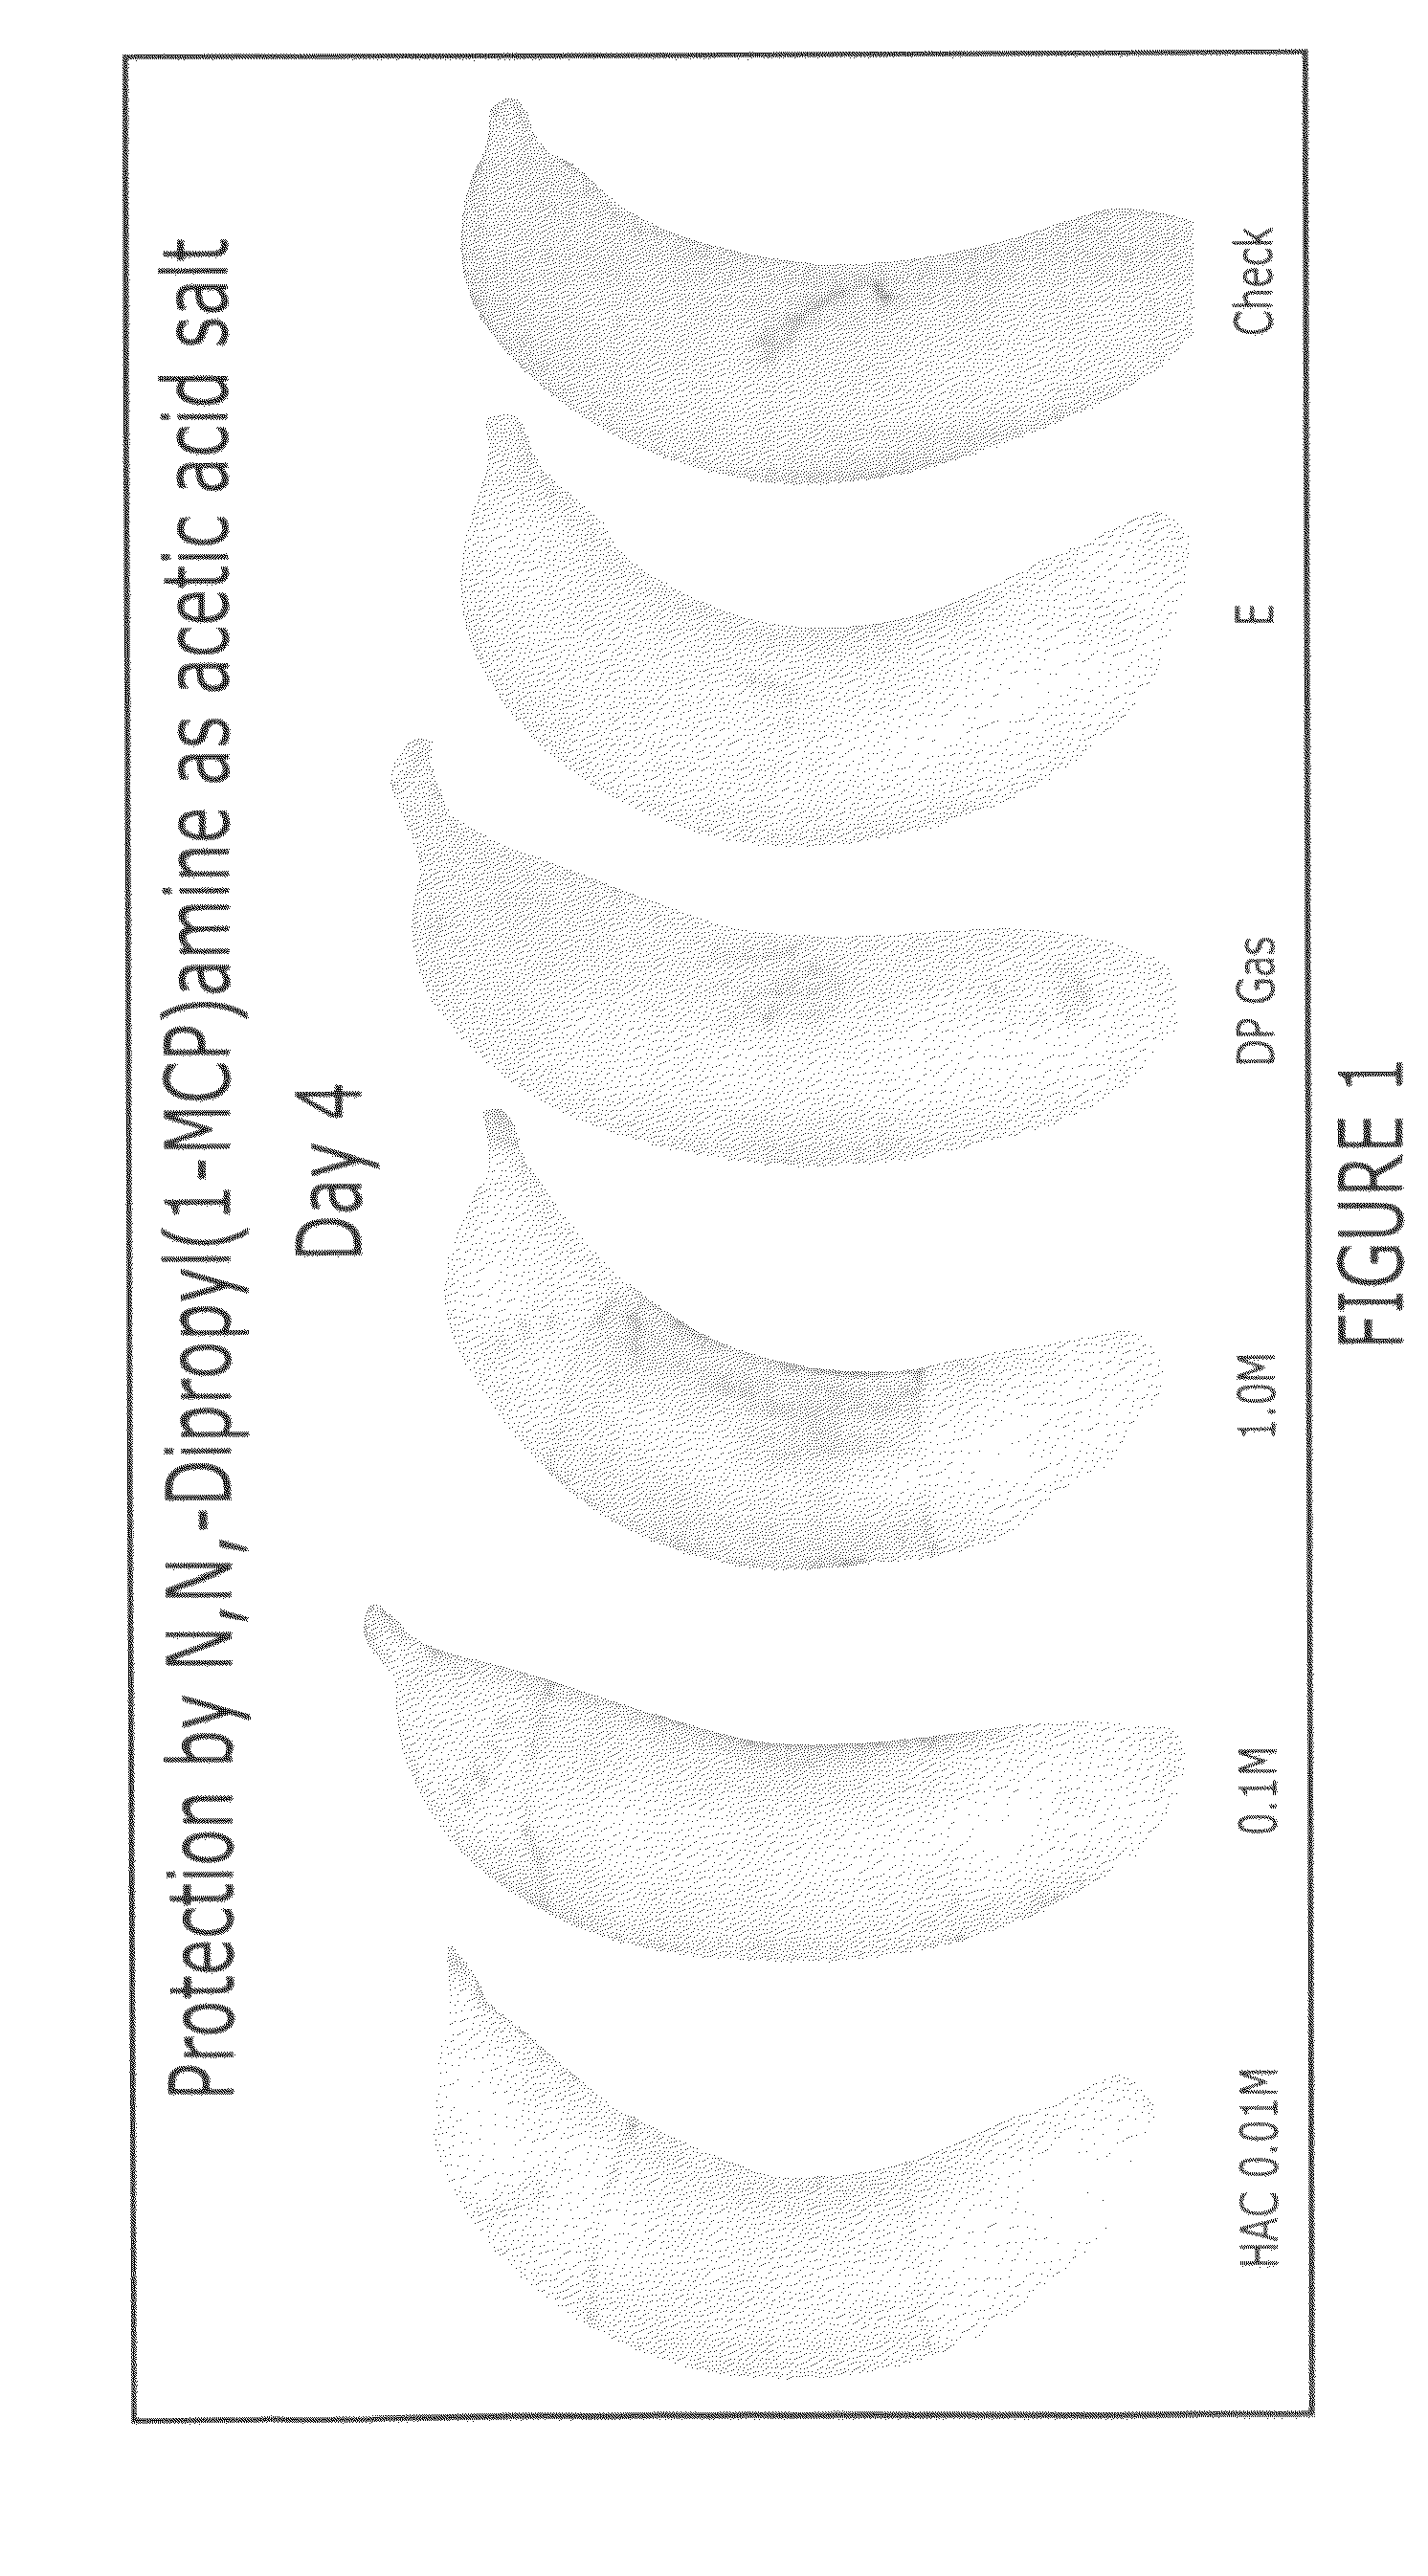 Methods of inhibiting ethylene responses in plants using cyclopropene amine compounds